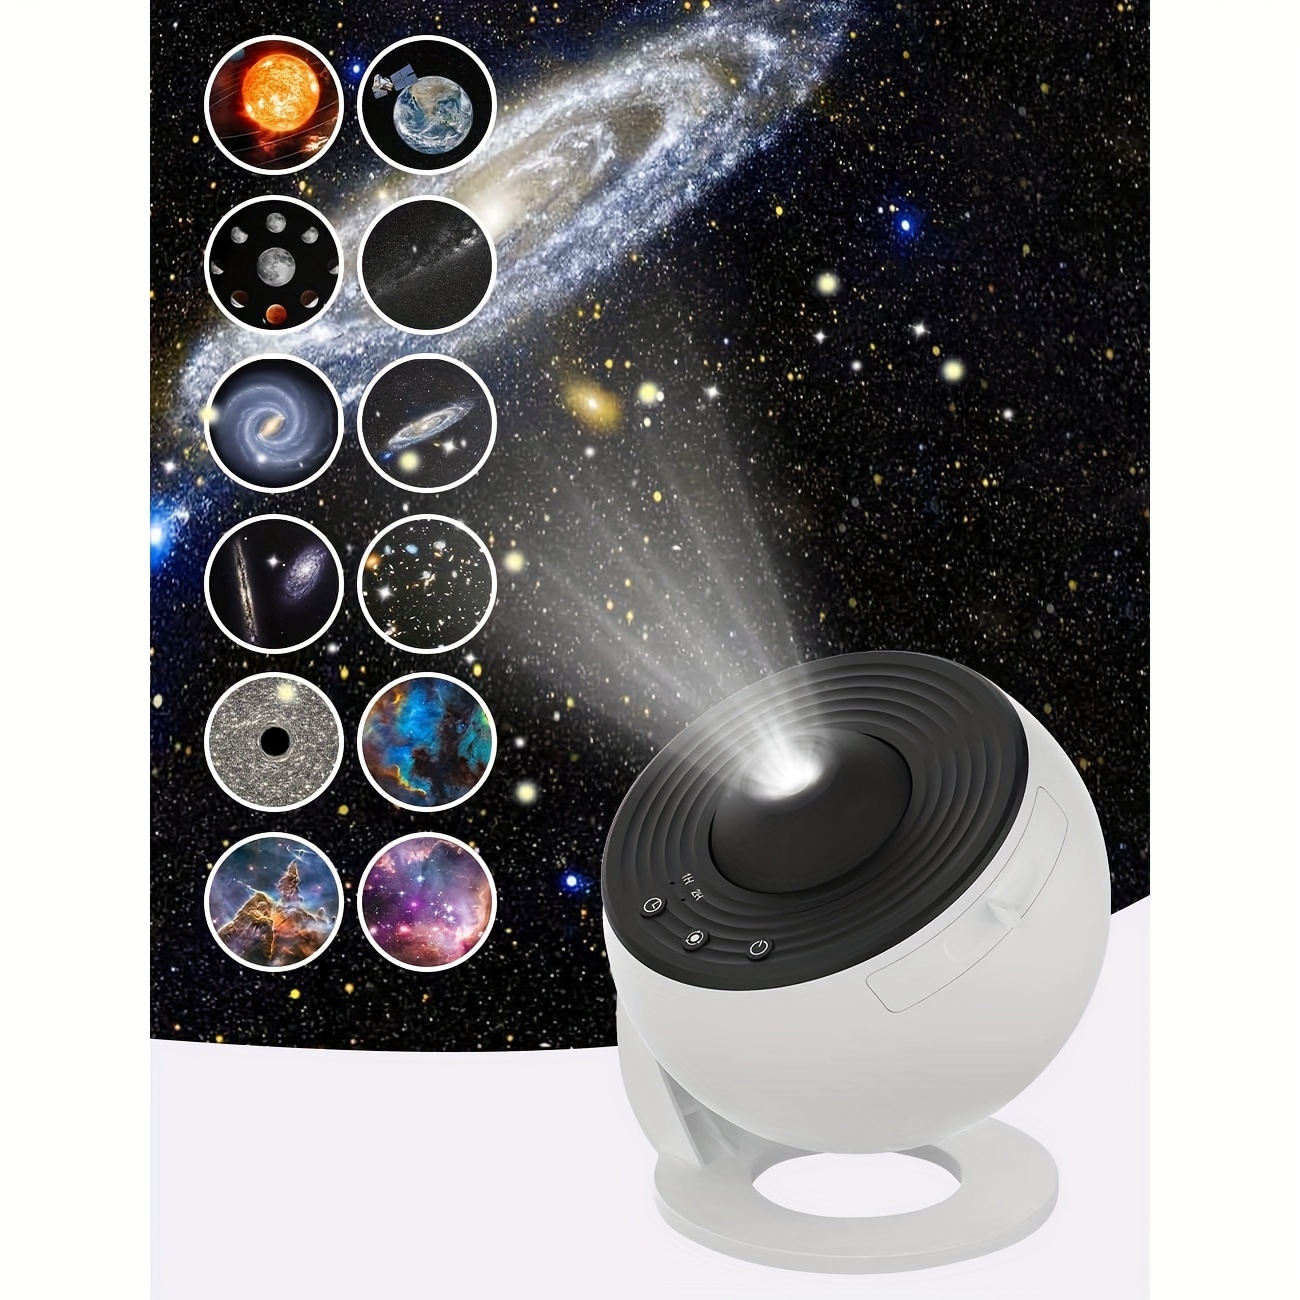 

Vansmago Galaxy Projector, 13 In 1 Planetarium Star Projector Realistic Starry Sky Night Light With Solar System Constellation Moon For Bedroom Ceiling Home Theater Living Room Decor